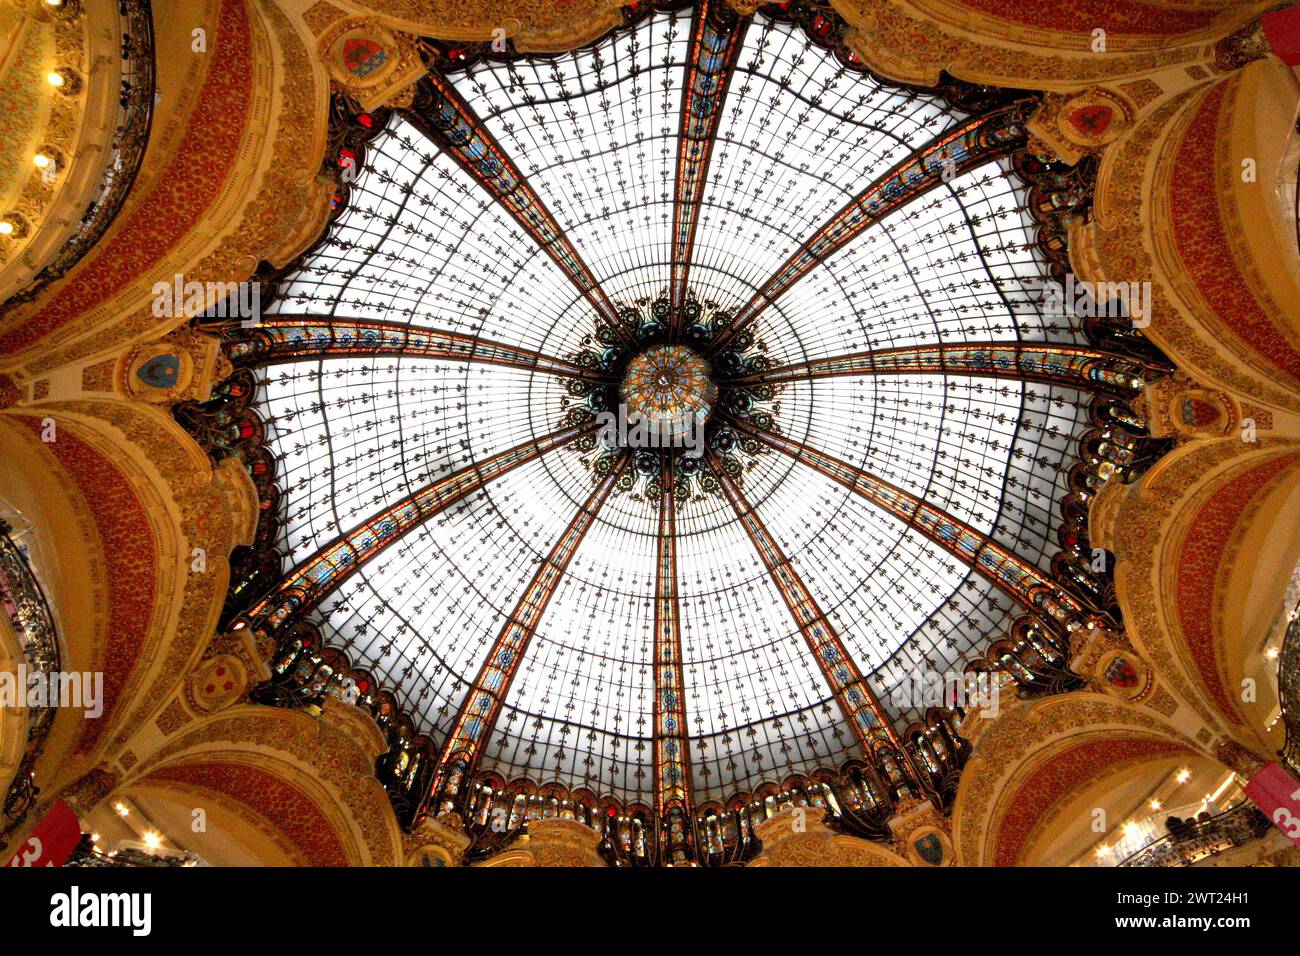 Ceiling of the Galeries Lafayette department store in the center of Paris, France. vvbvanbree photography Stock Photo